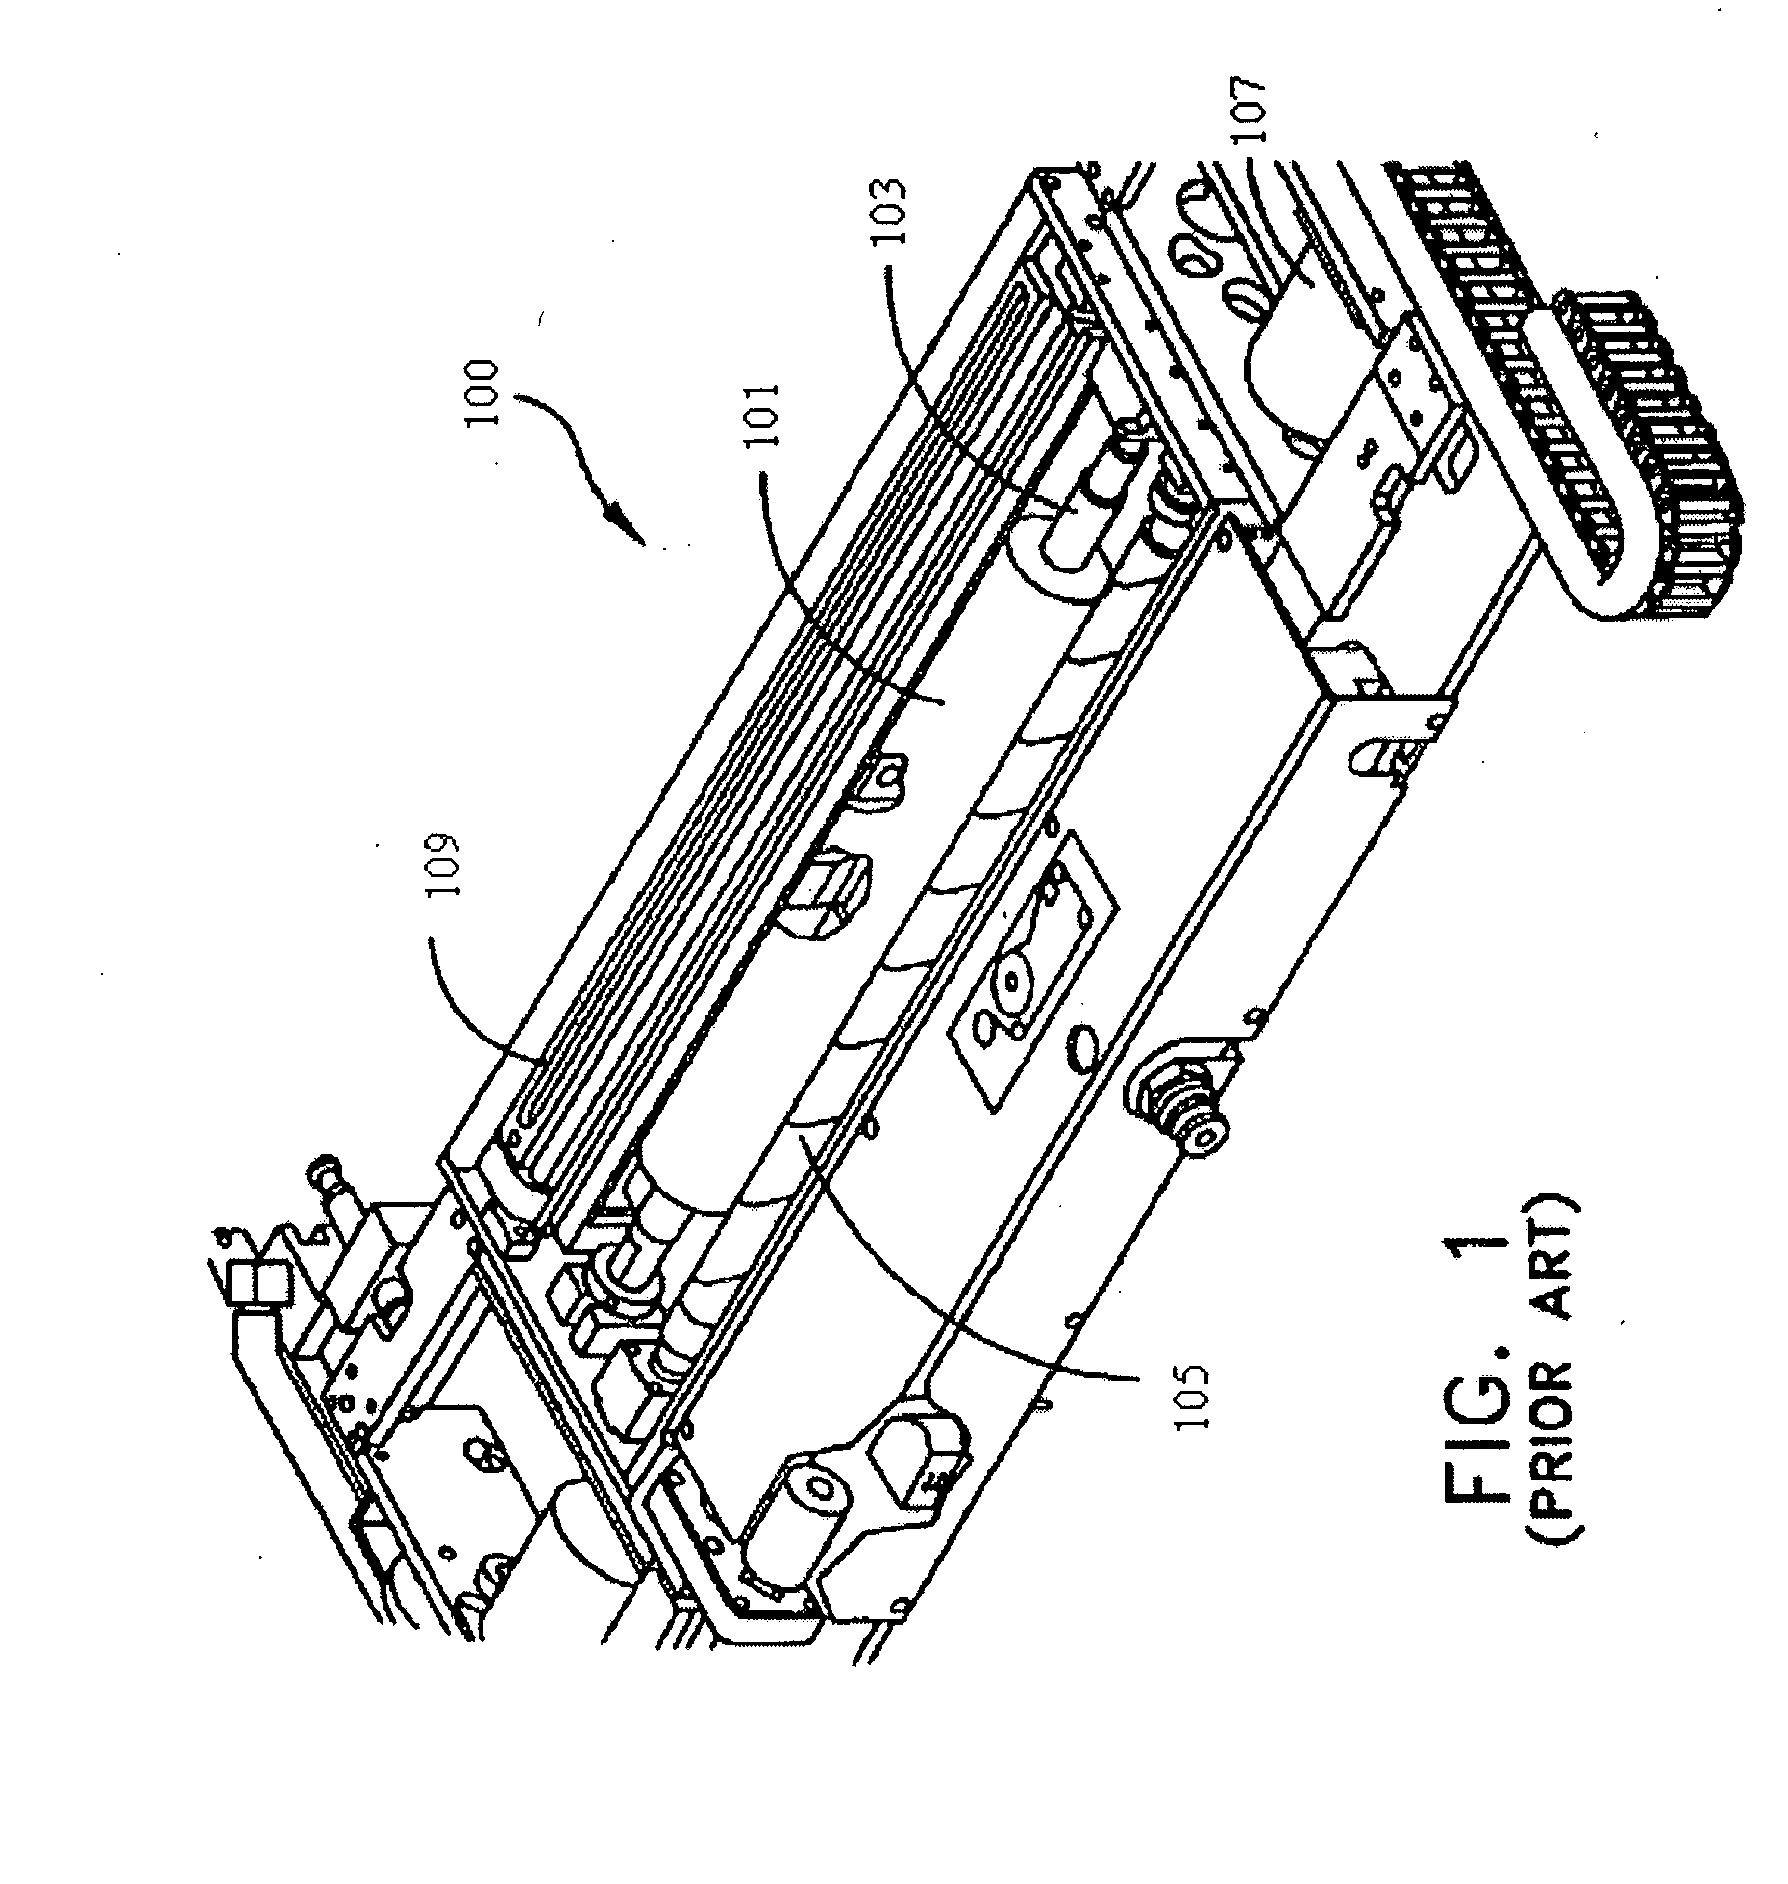 Methods and apparatus for engaging web-material cores